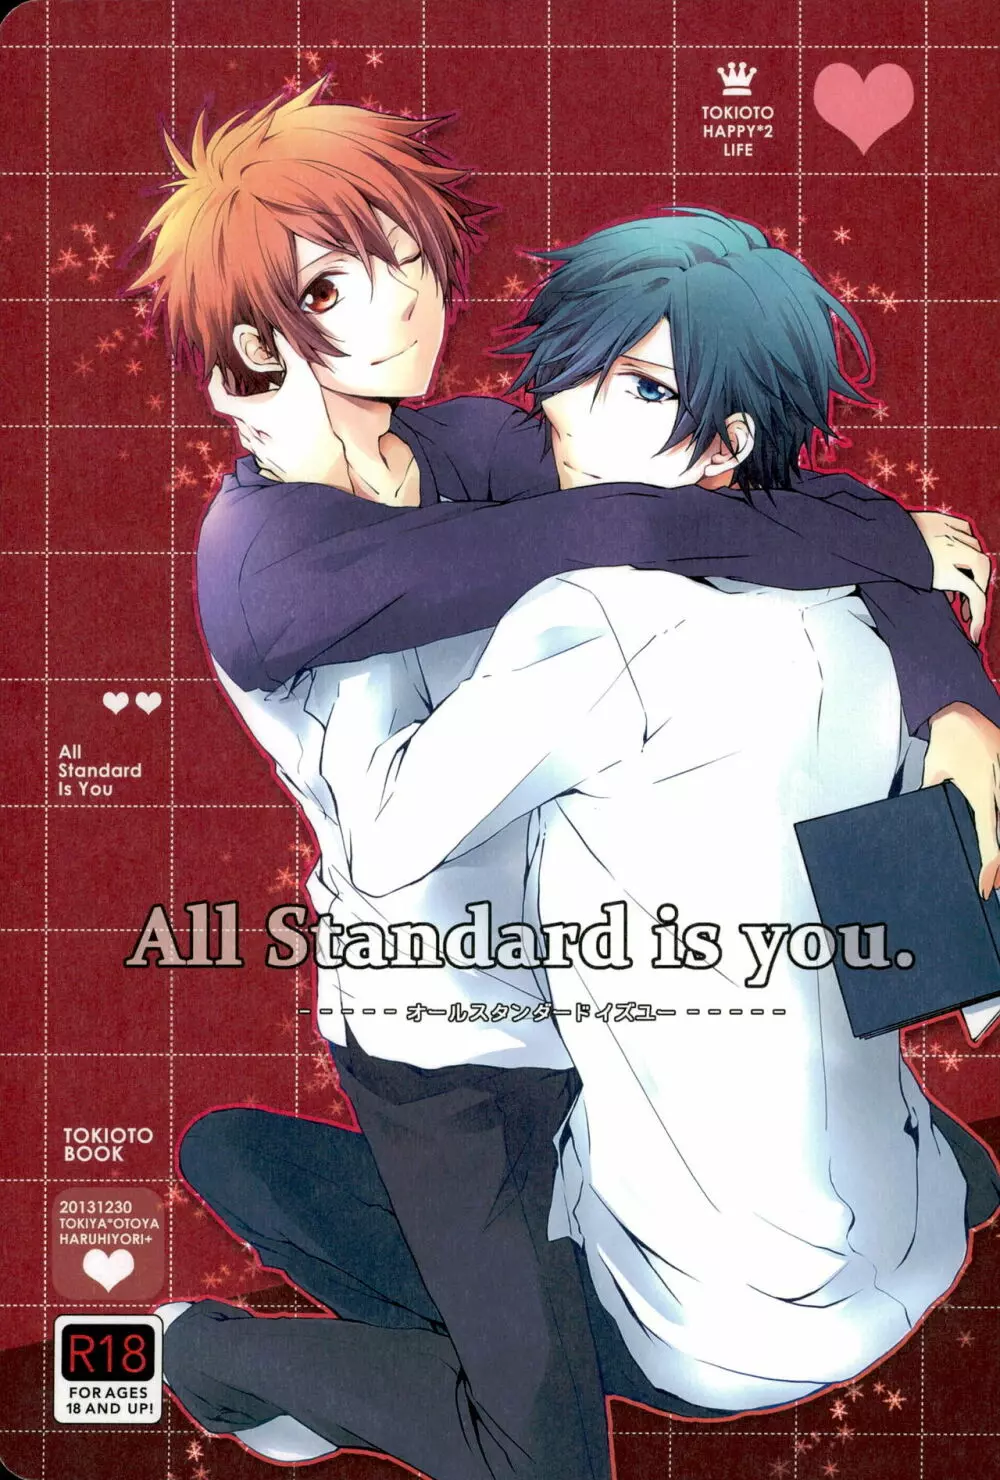 All Standard is you. - page1